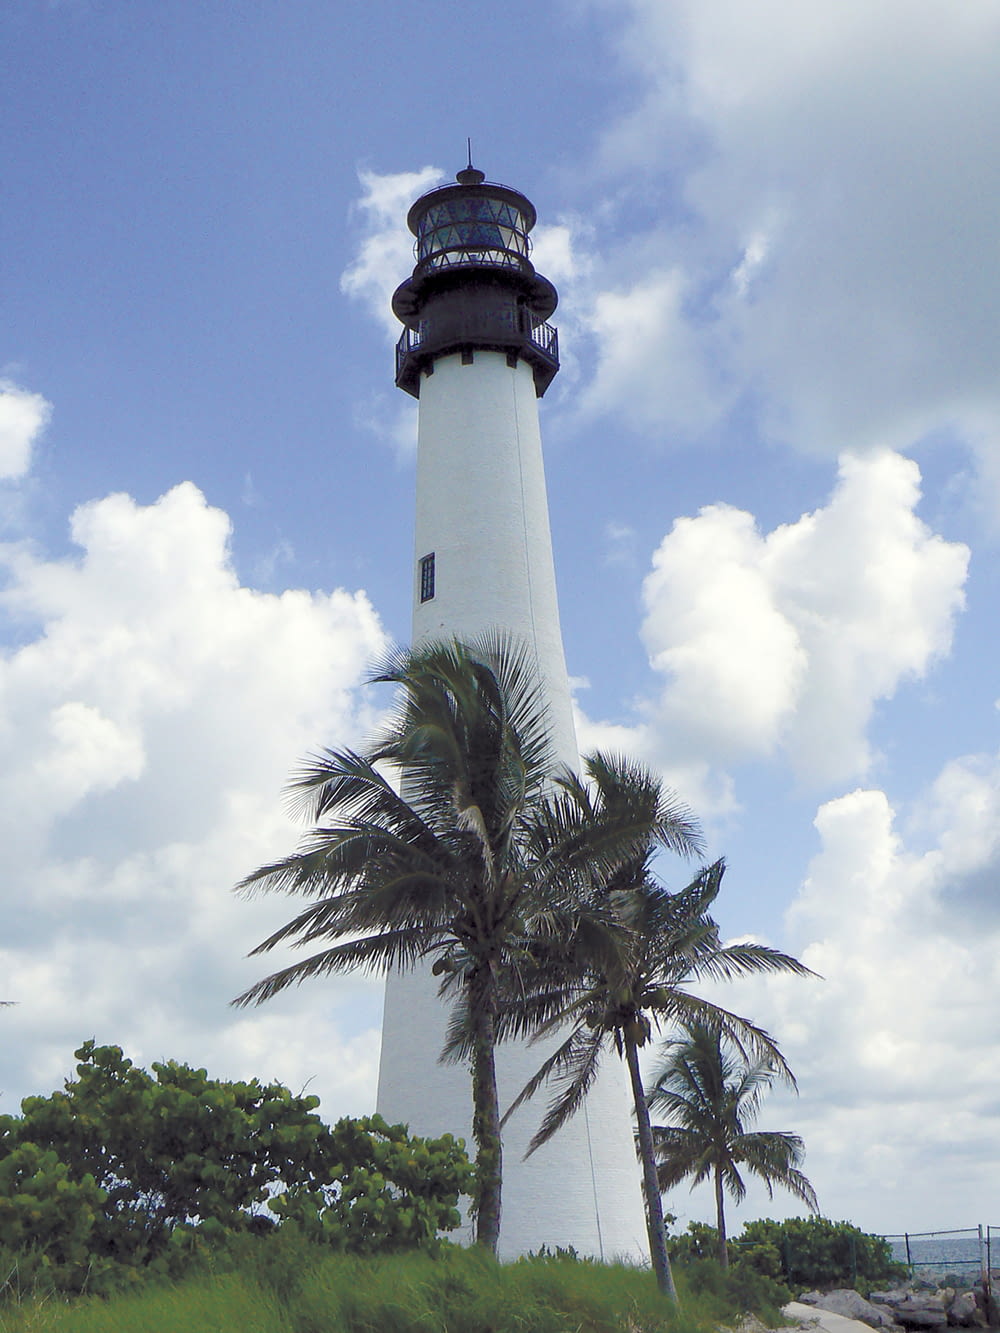 a tall white tower with a pointed top and palm trees in front of it